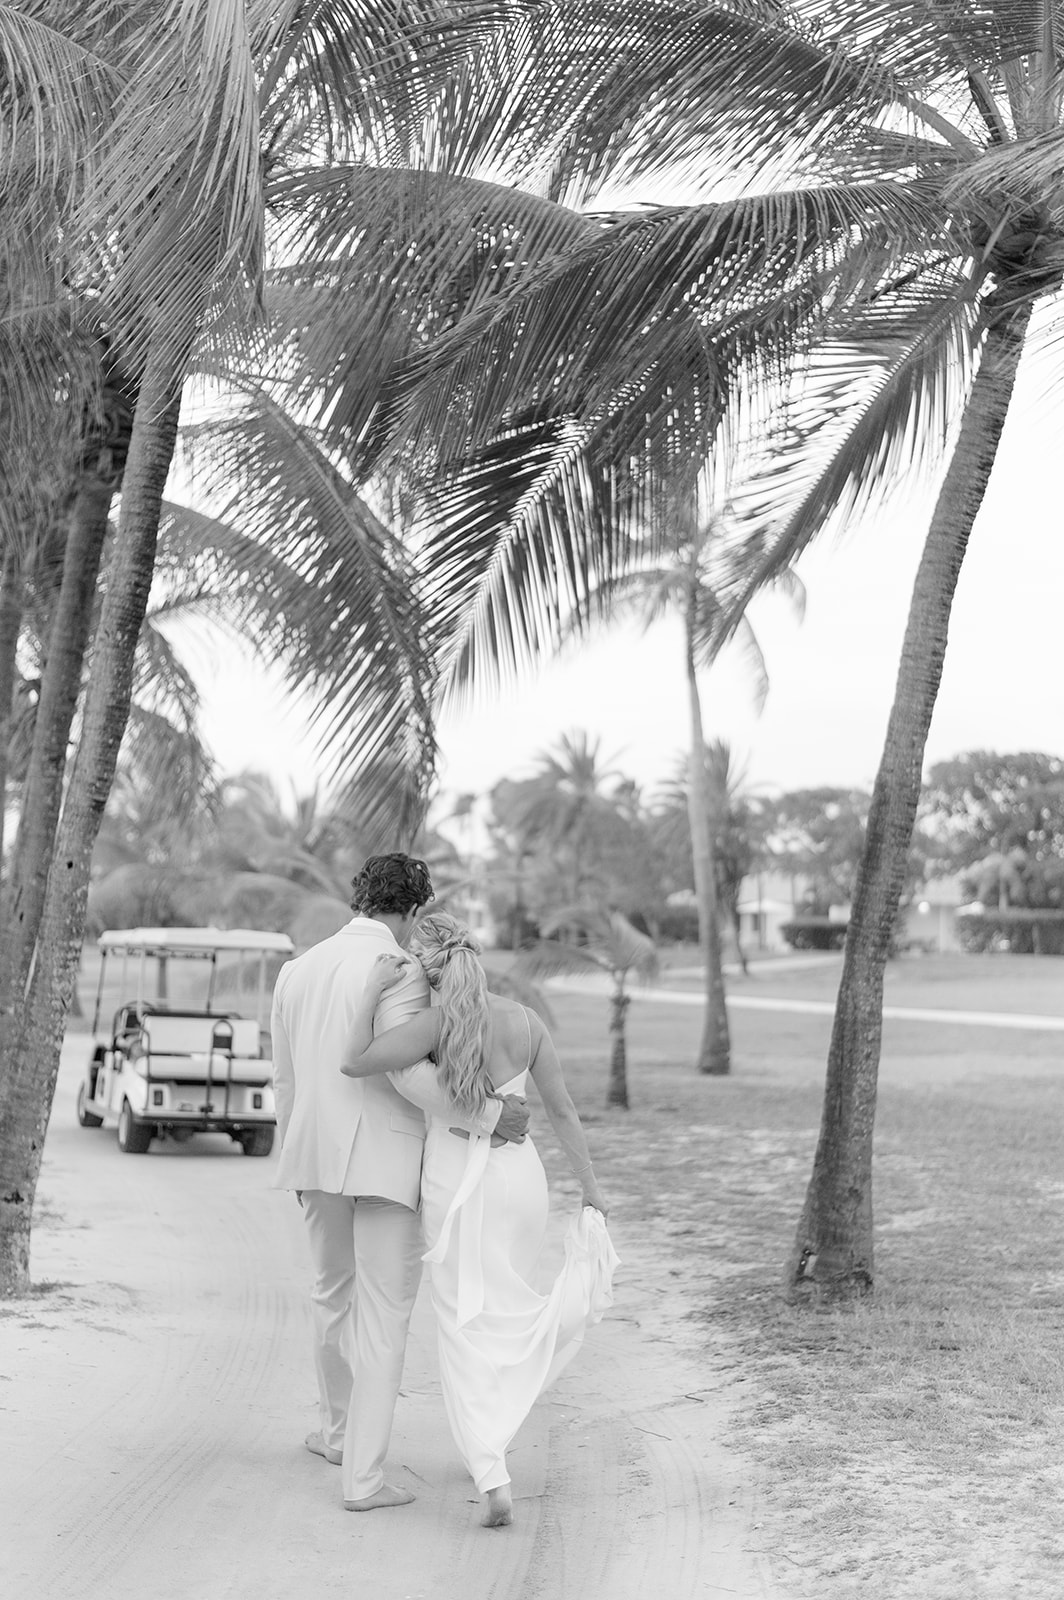 Antigua's top photographer captures the essence of the wedding day
